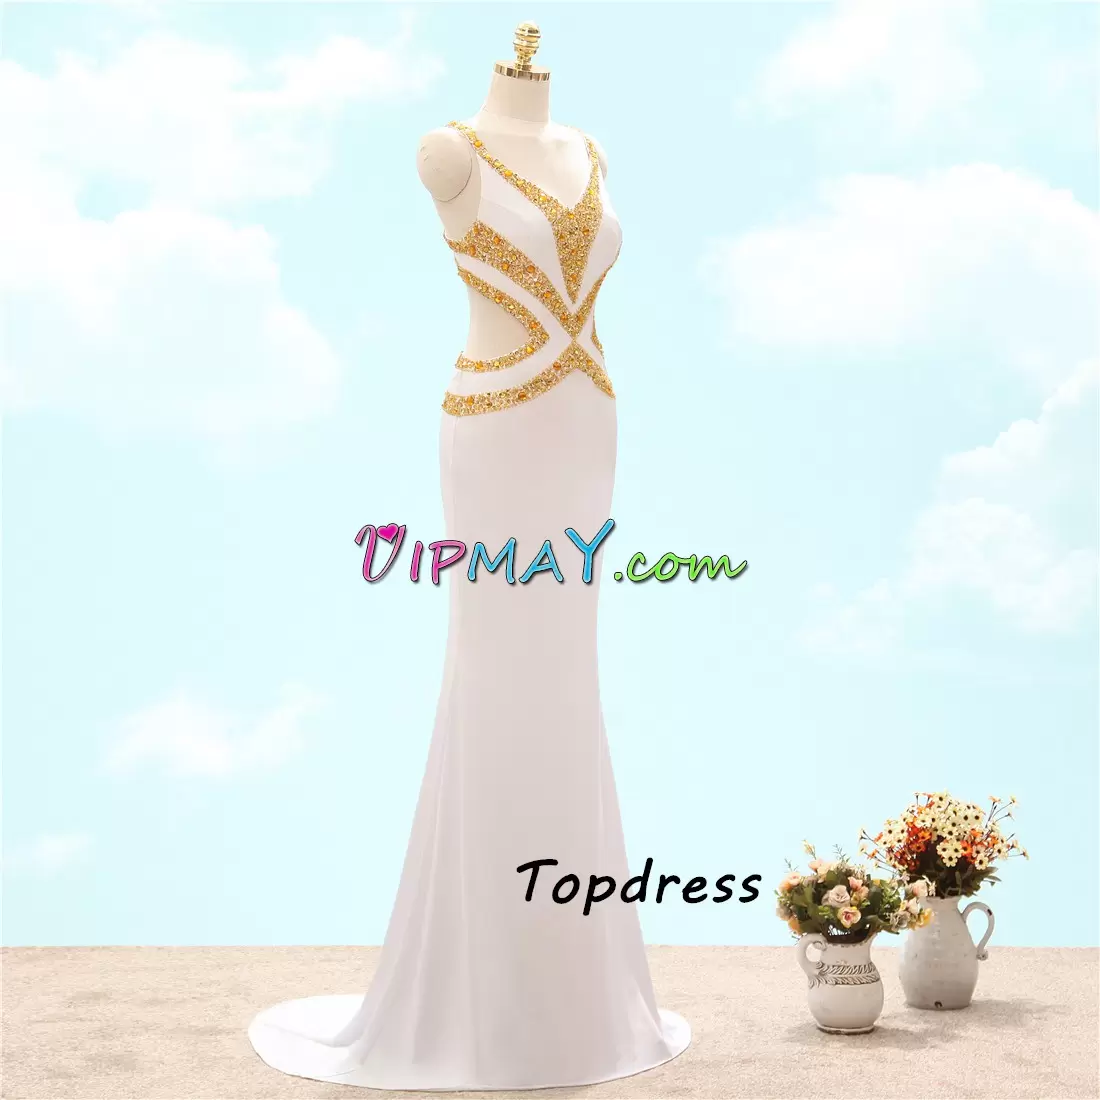 Delicate Yellow Sleeveless Floor Length Beading and Lace Backless Homecoming Dress Online V-neck